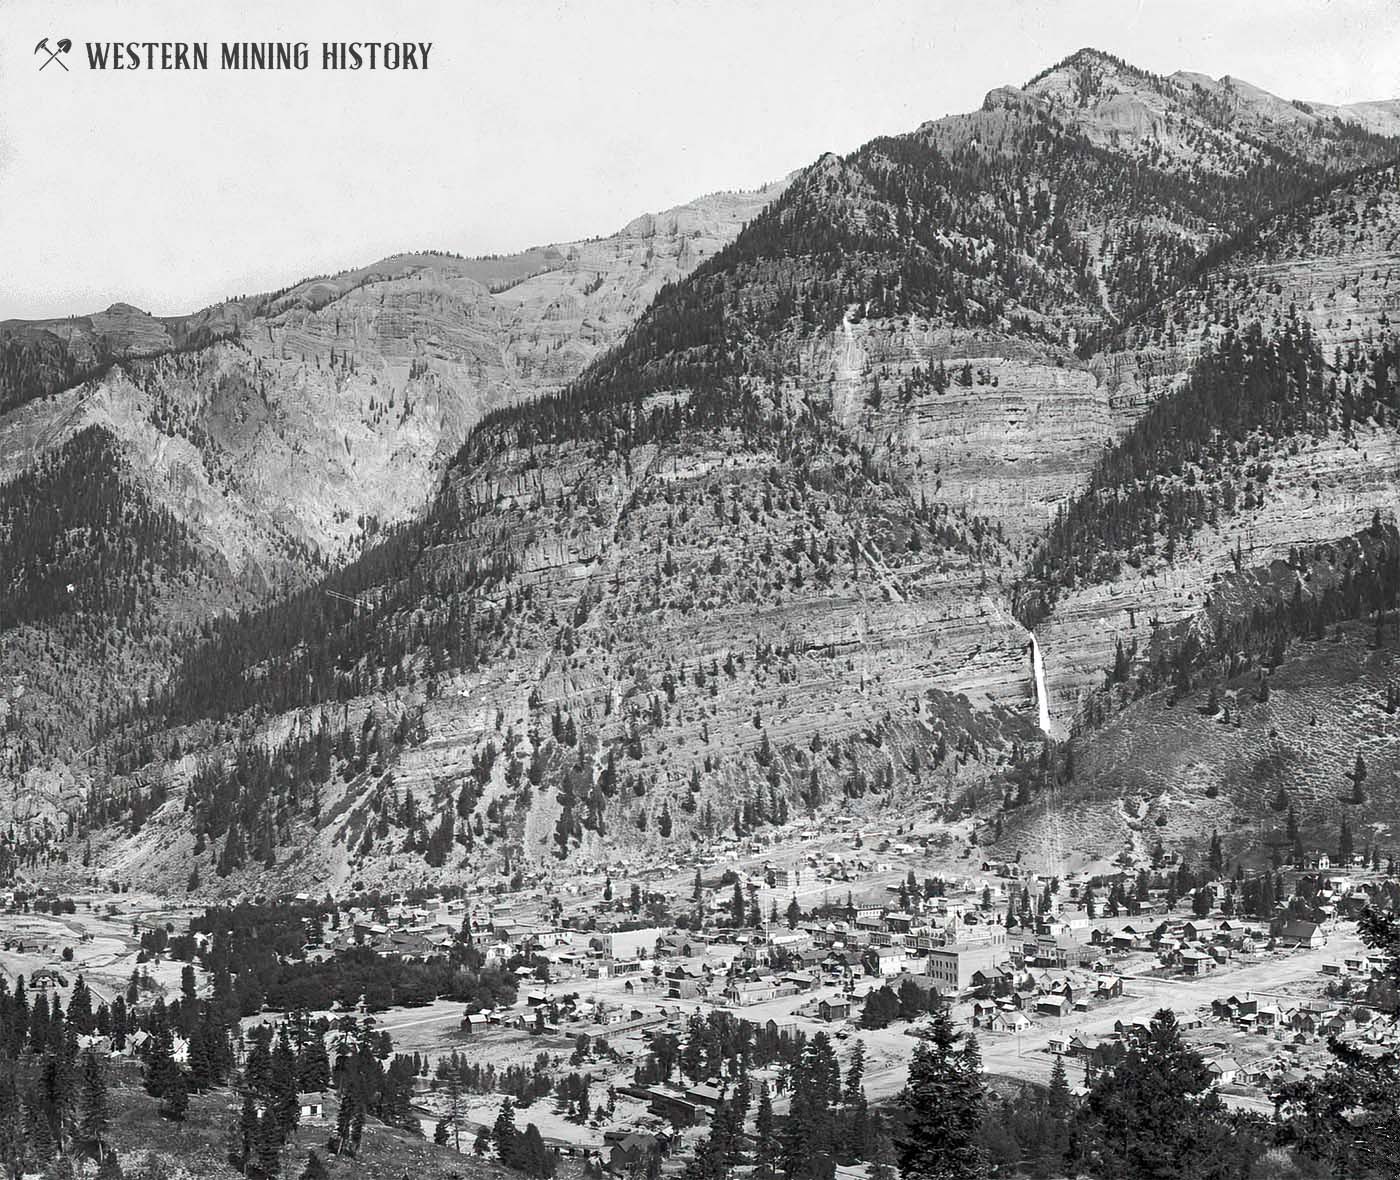 View of Ouray, Colorado ca. 1890s